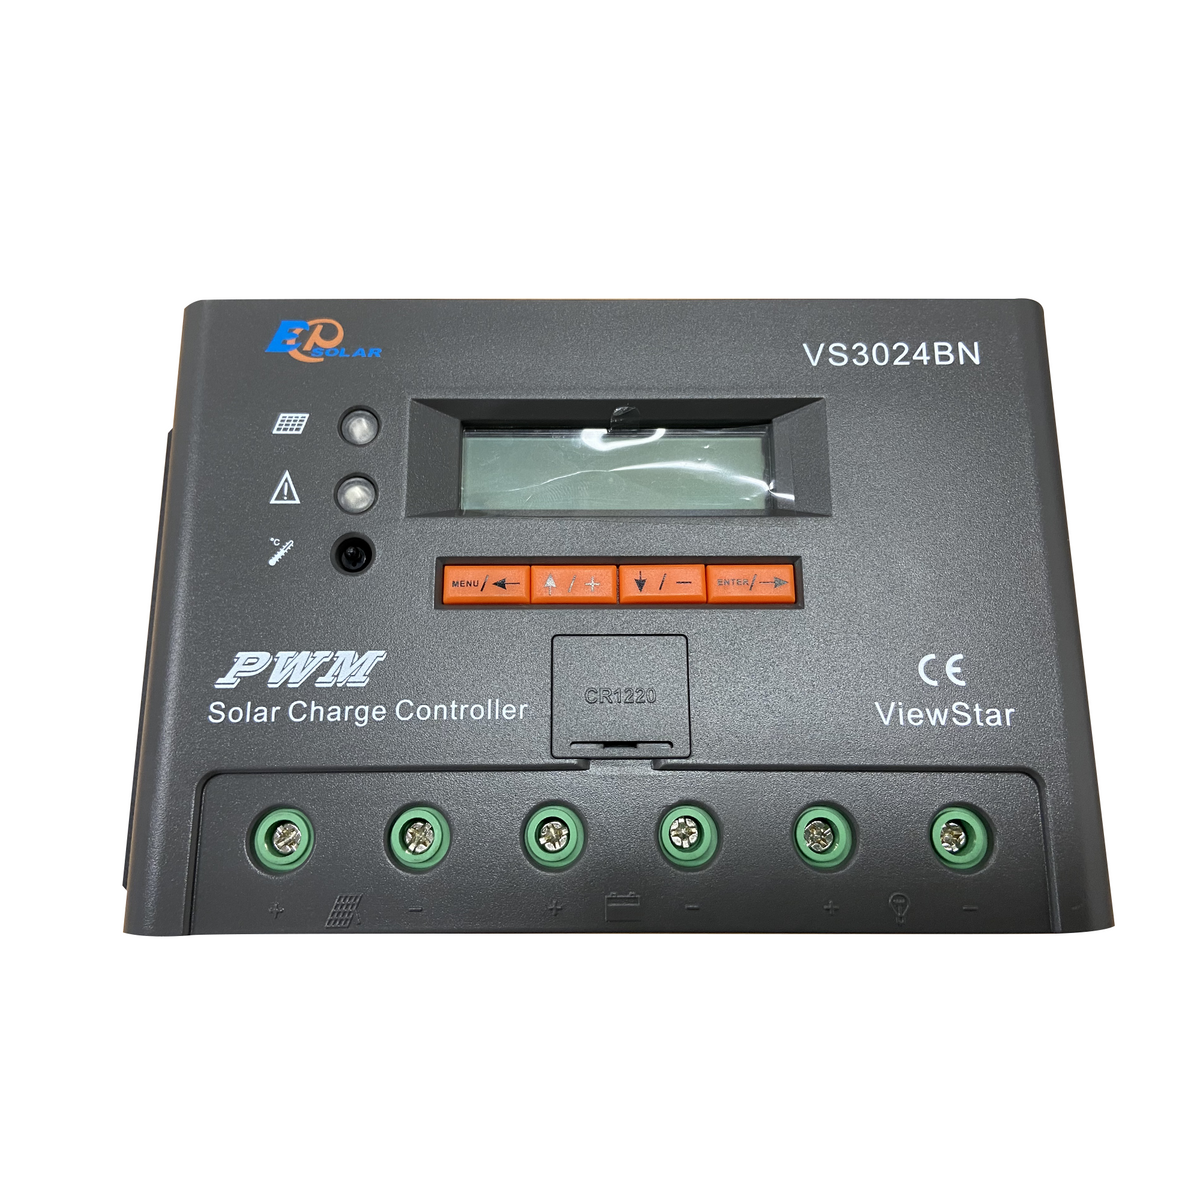 EP Solar PWM Solar Charge Controller 12/24V VS3024BN - Clearance